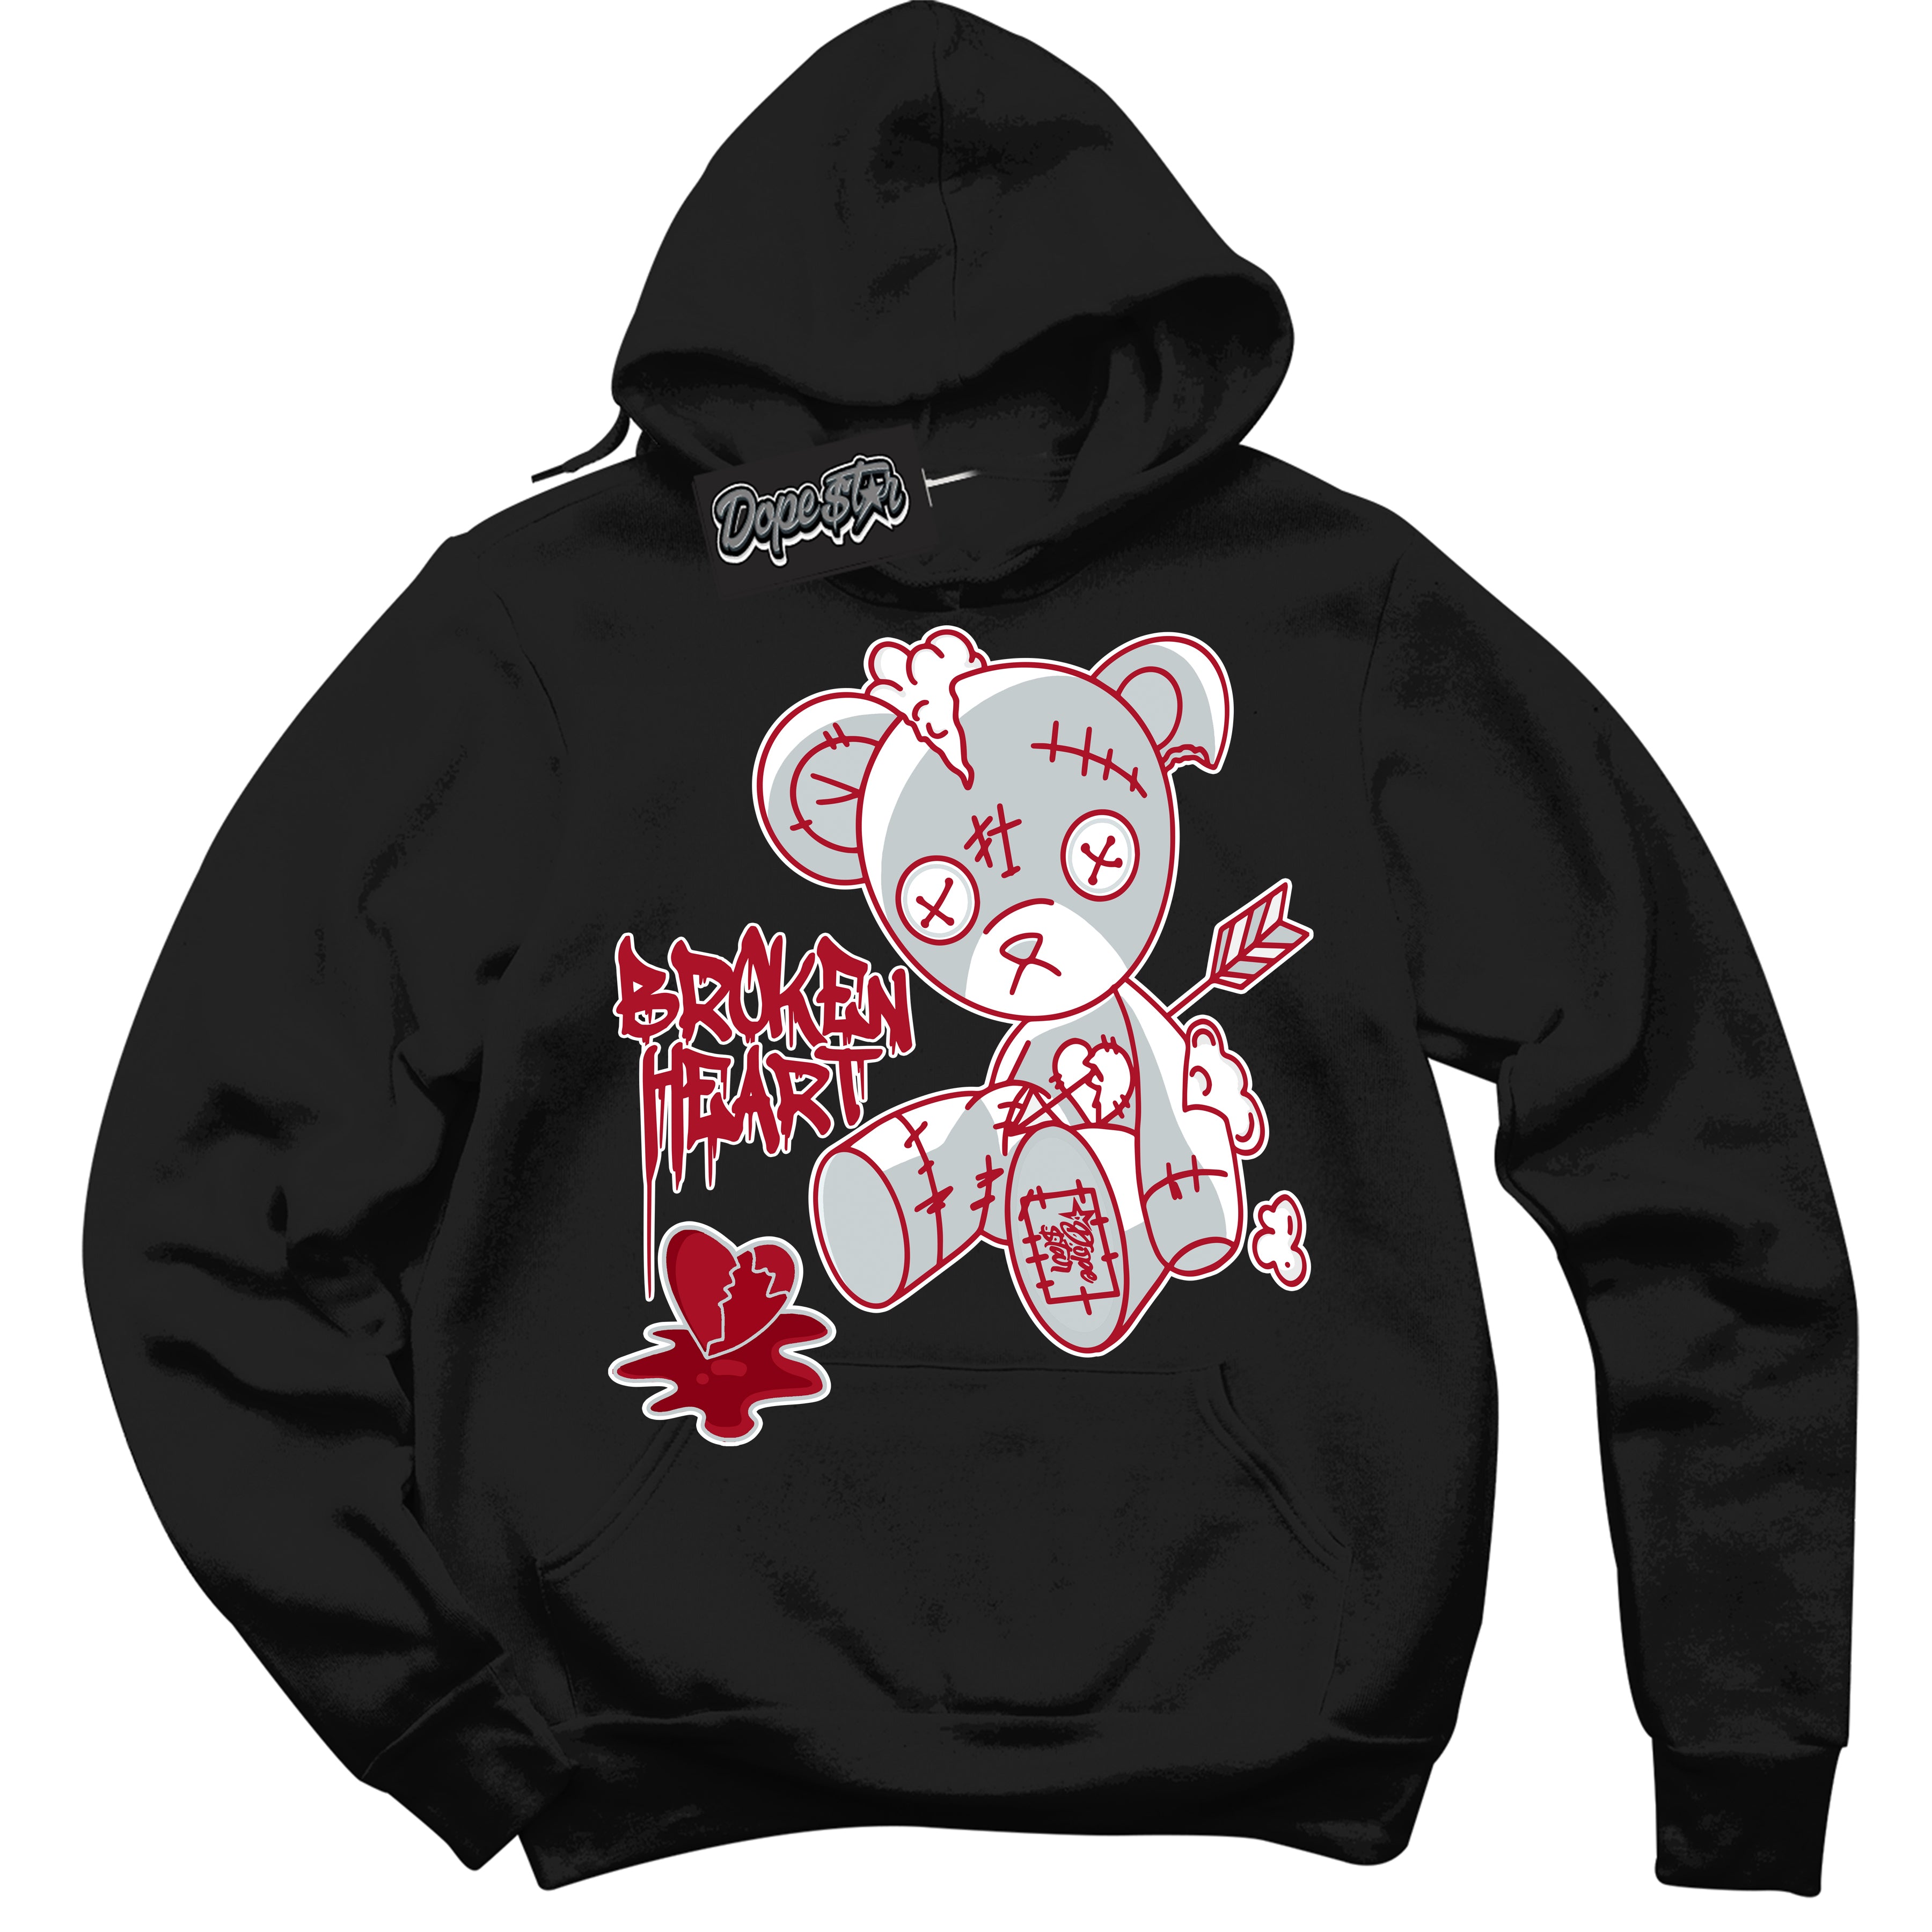 Cool Black Hoodie with “ Broken Heart Bear ”  design that Perfectly Matches  Reverse Ultraman Sneakers.